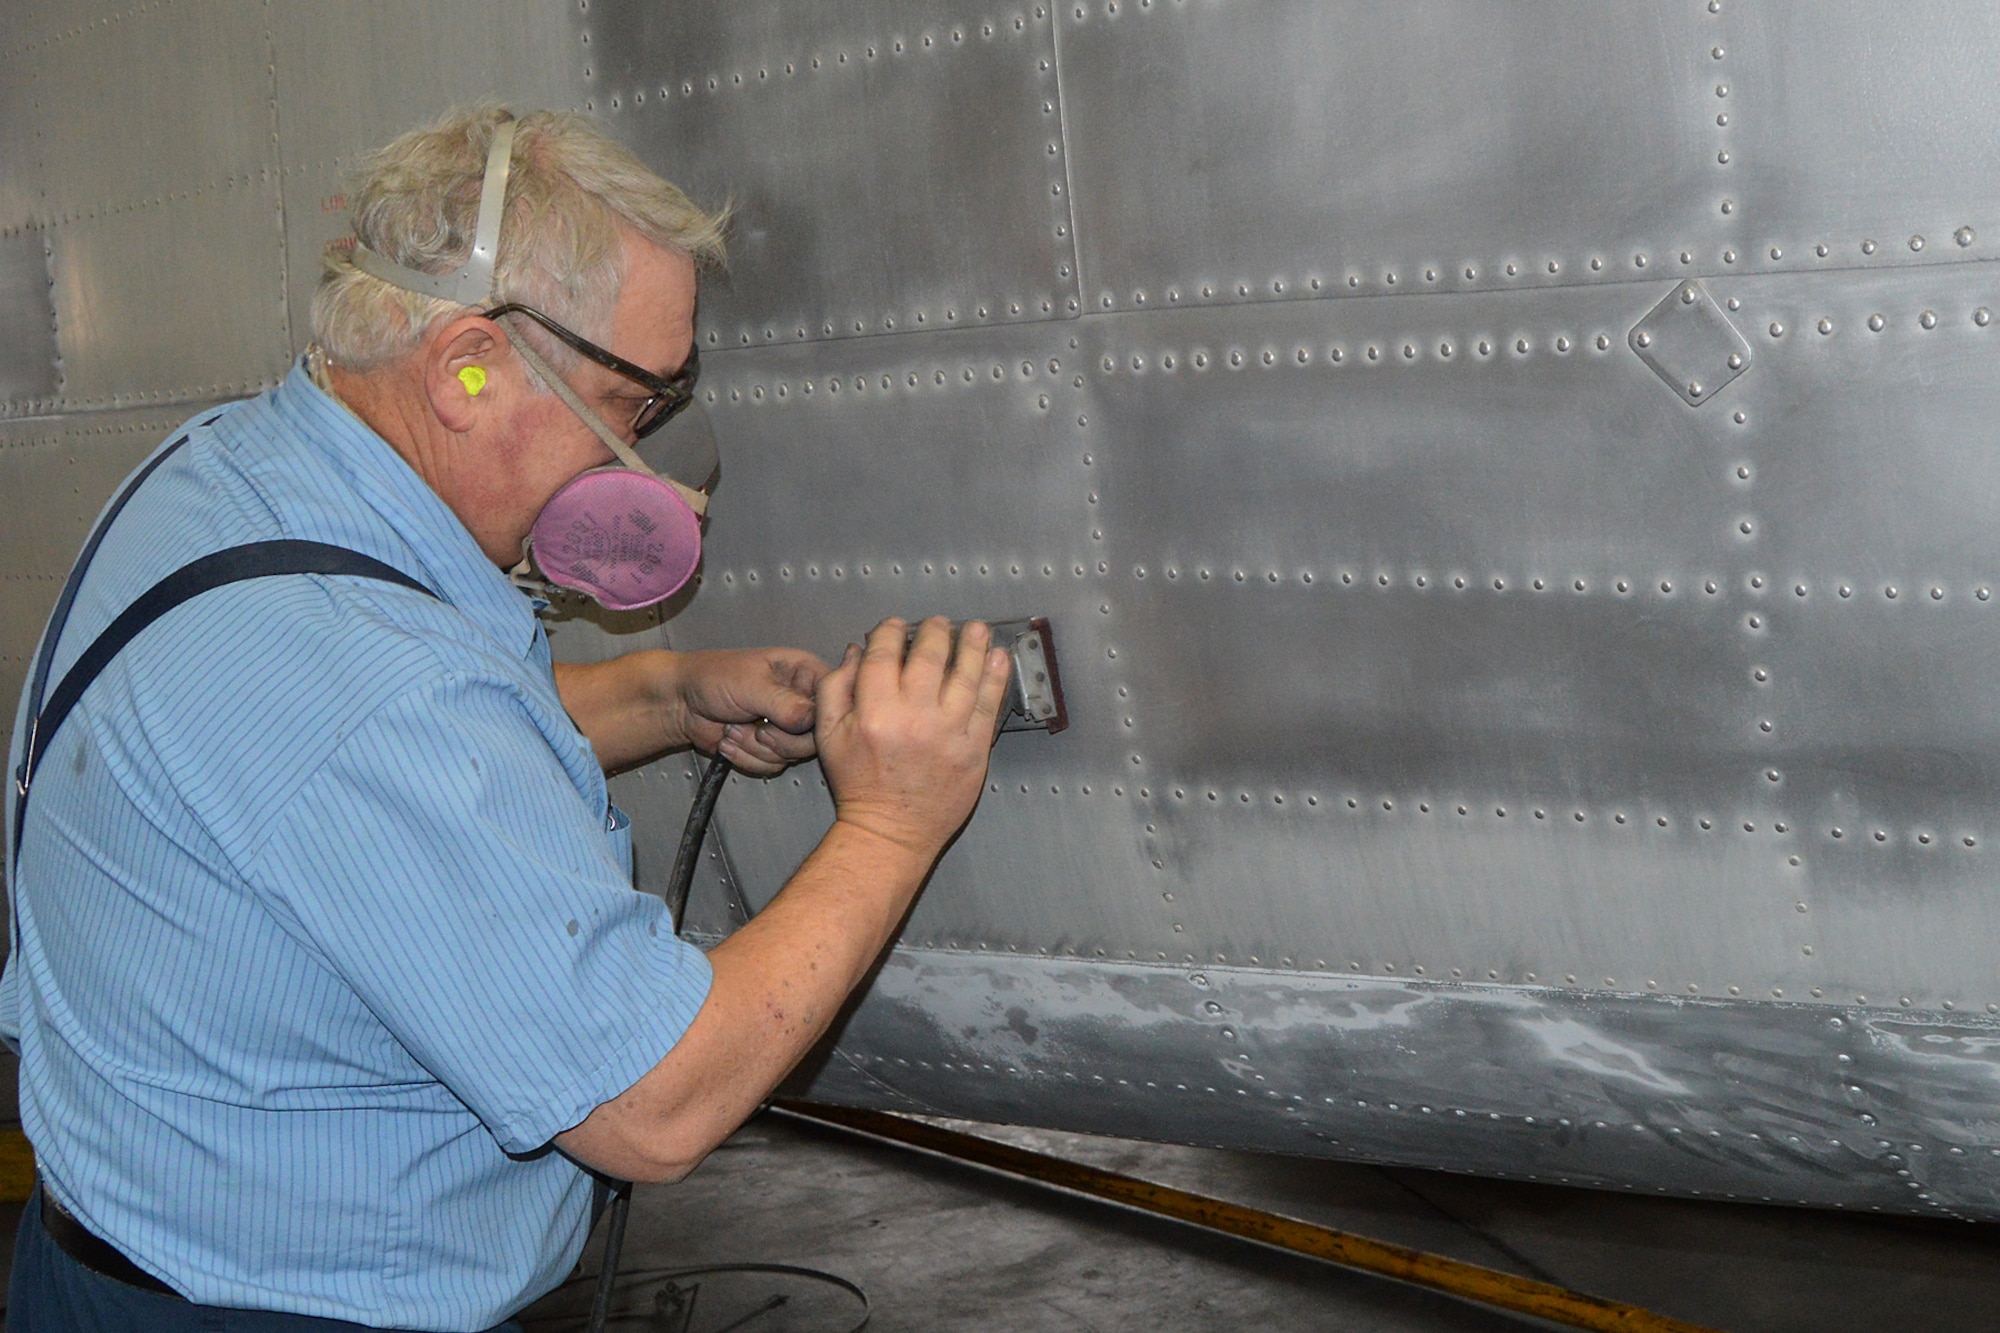 DAYTON, Ohio -- Restoration specialist Randy Canady works on the Fairchild C-119J Flying Boxcar in the restoration hangar at the National Museum of the United States Air Force. (U.S. Air Force photo)
